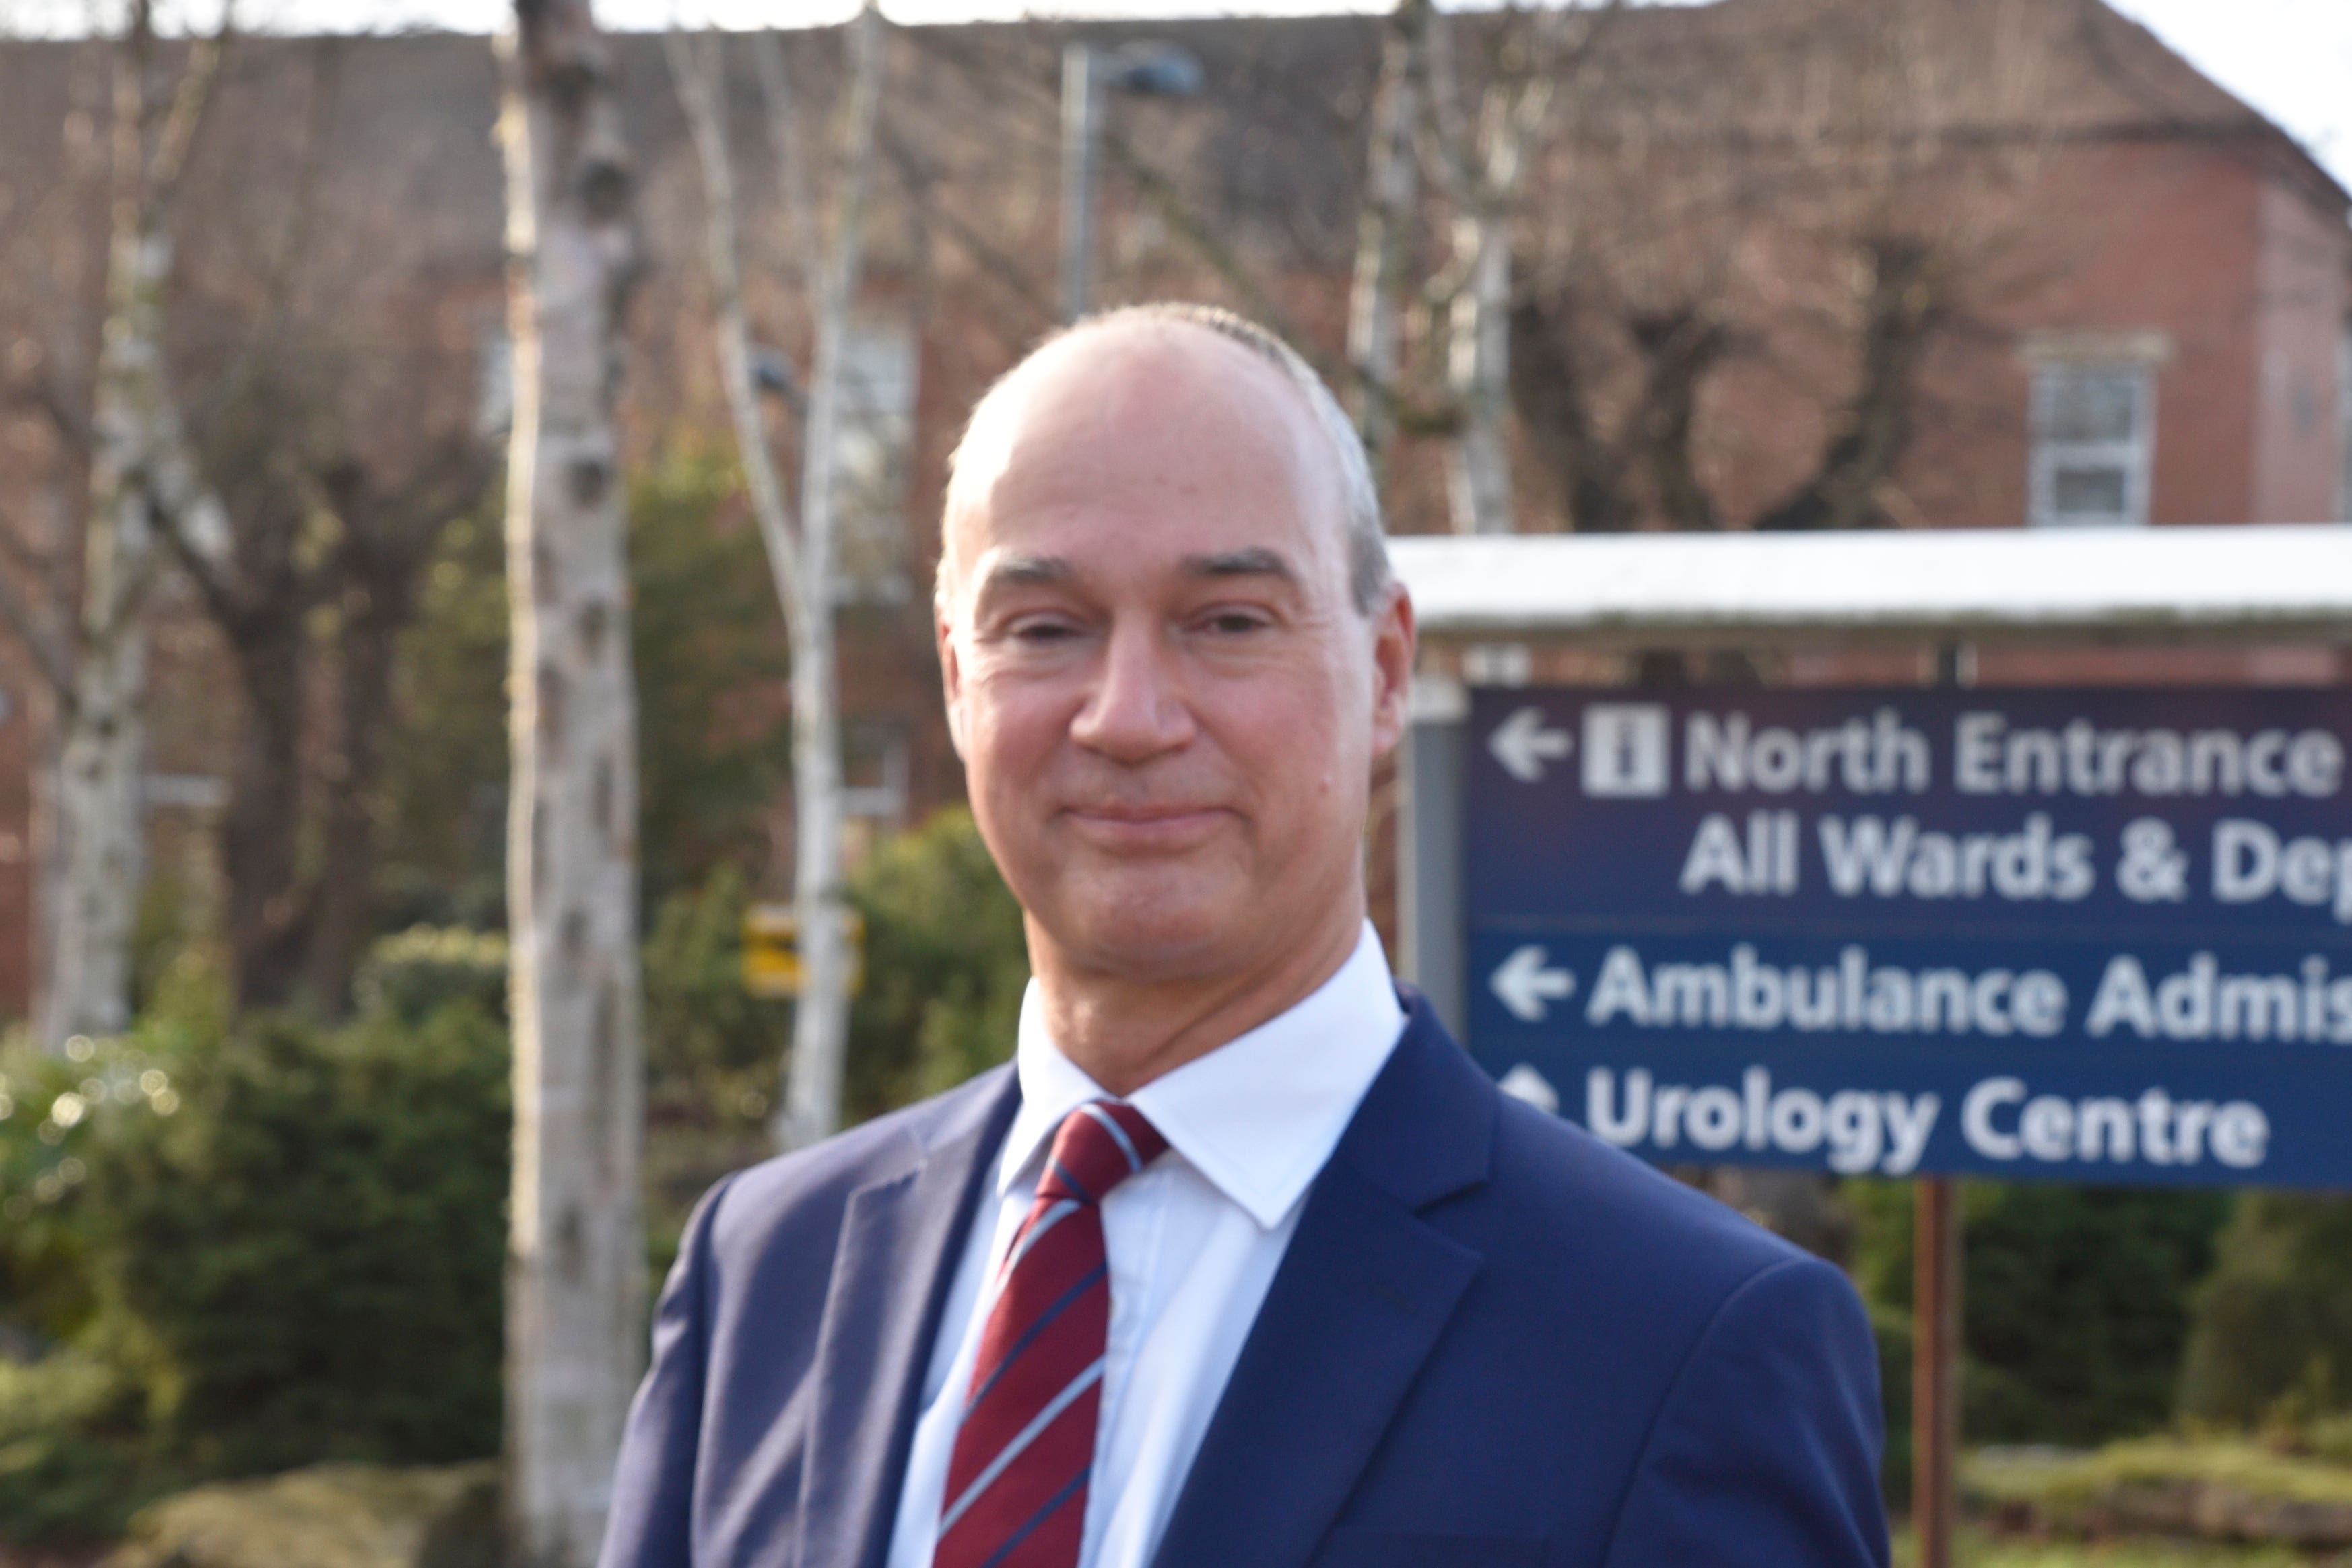 Nick Carver, Chairman of the Nottingham University Hospitals NHS Trust will publicly apologise